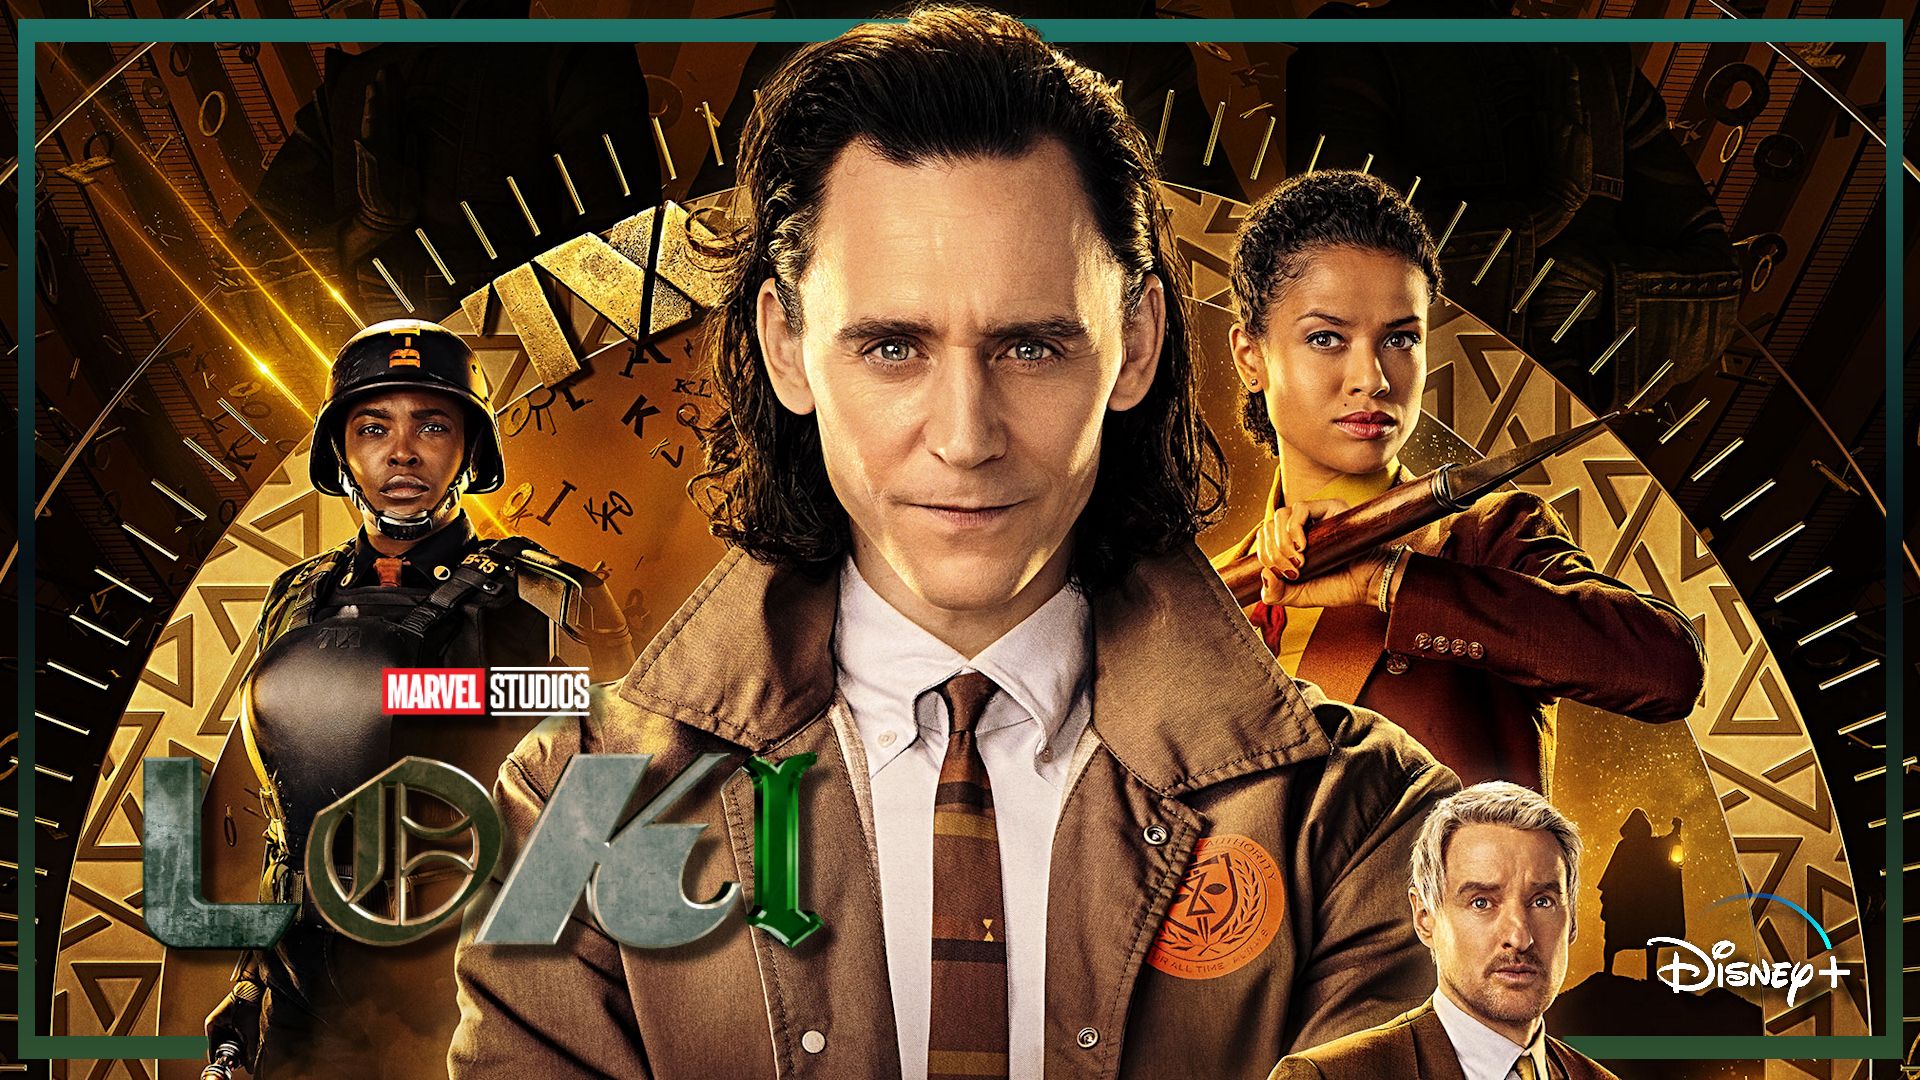 Disney Plus Shares A New Poster For Marvel Studios' Loki of the Force